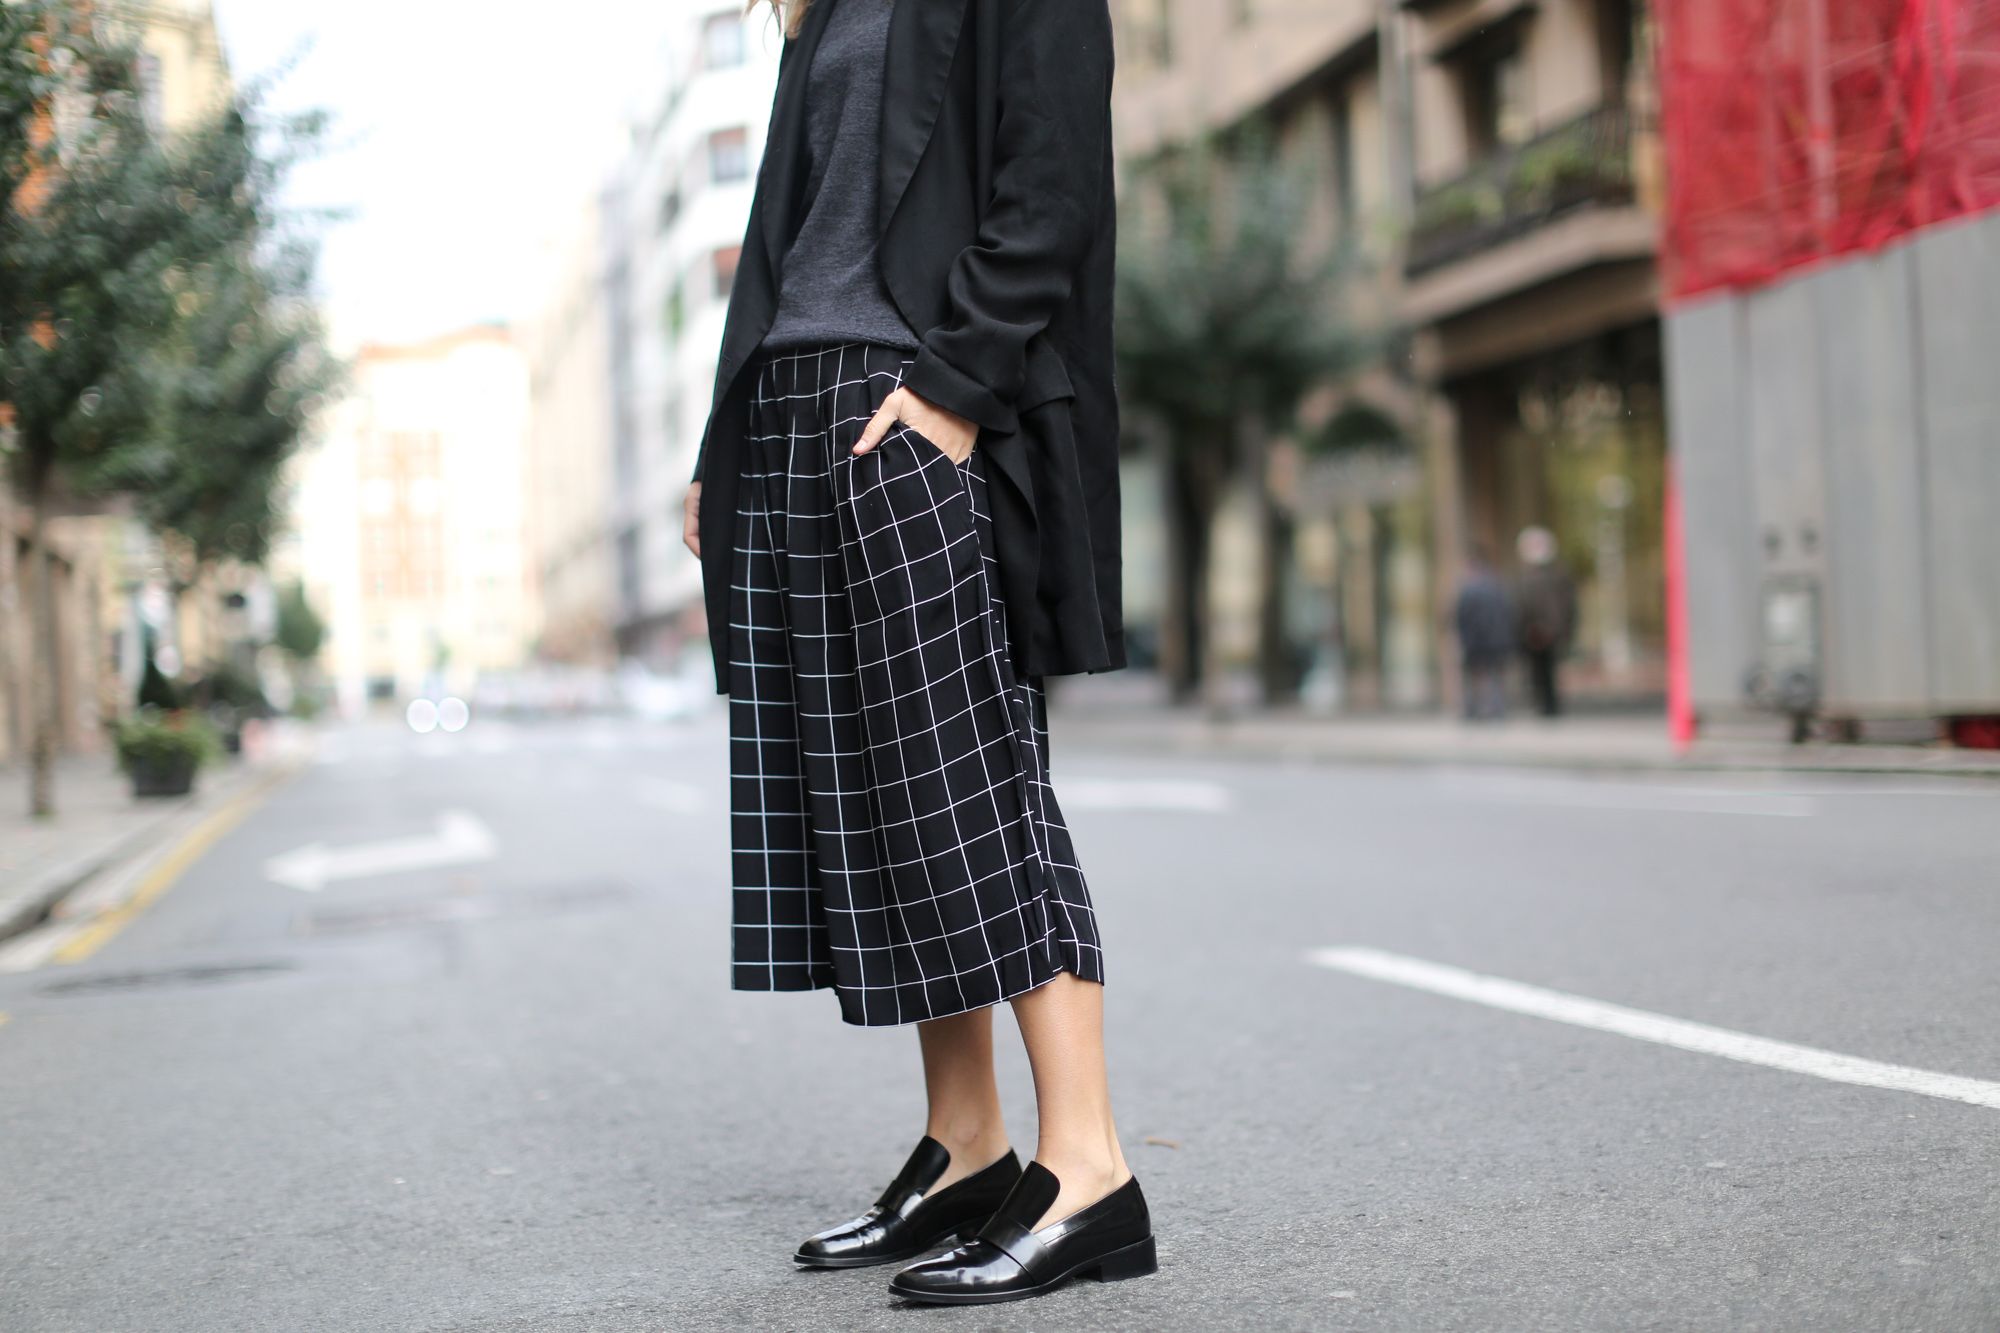 clochet-streetstyle-monki-squared-black-white-culottes-lykke-li-and-other-stories-loafers-6-1-d75667f921a306614ea9a52e5c61a893.jpg